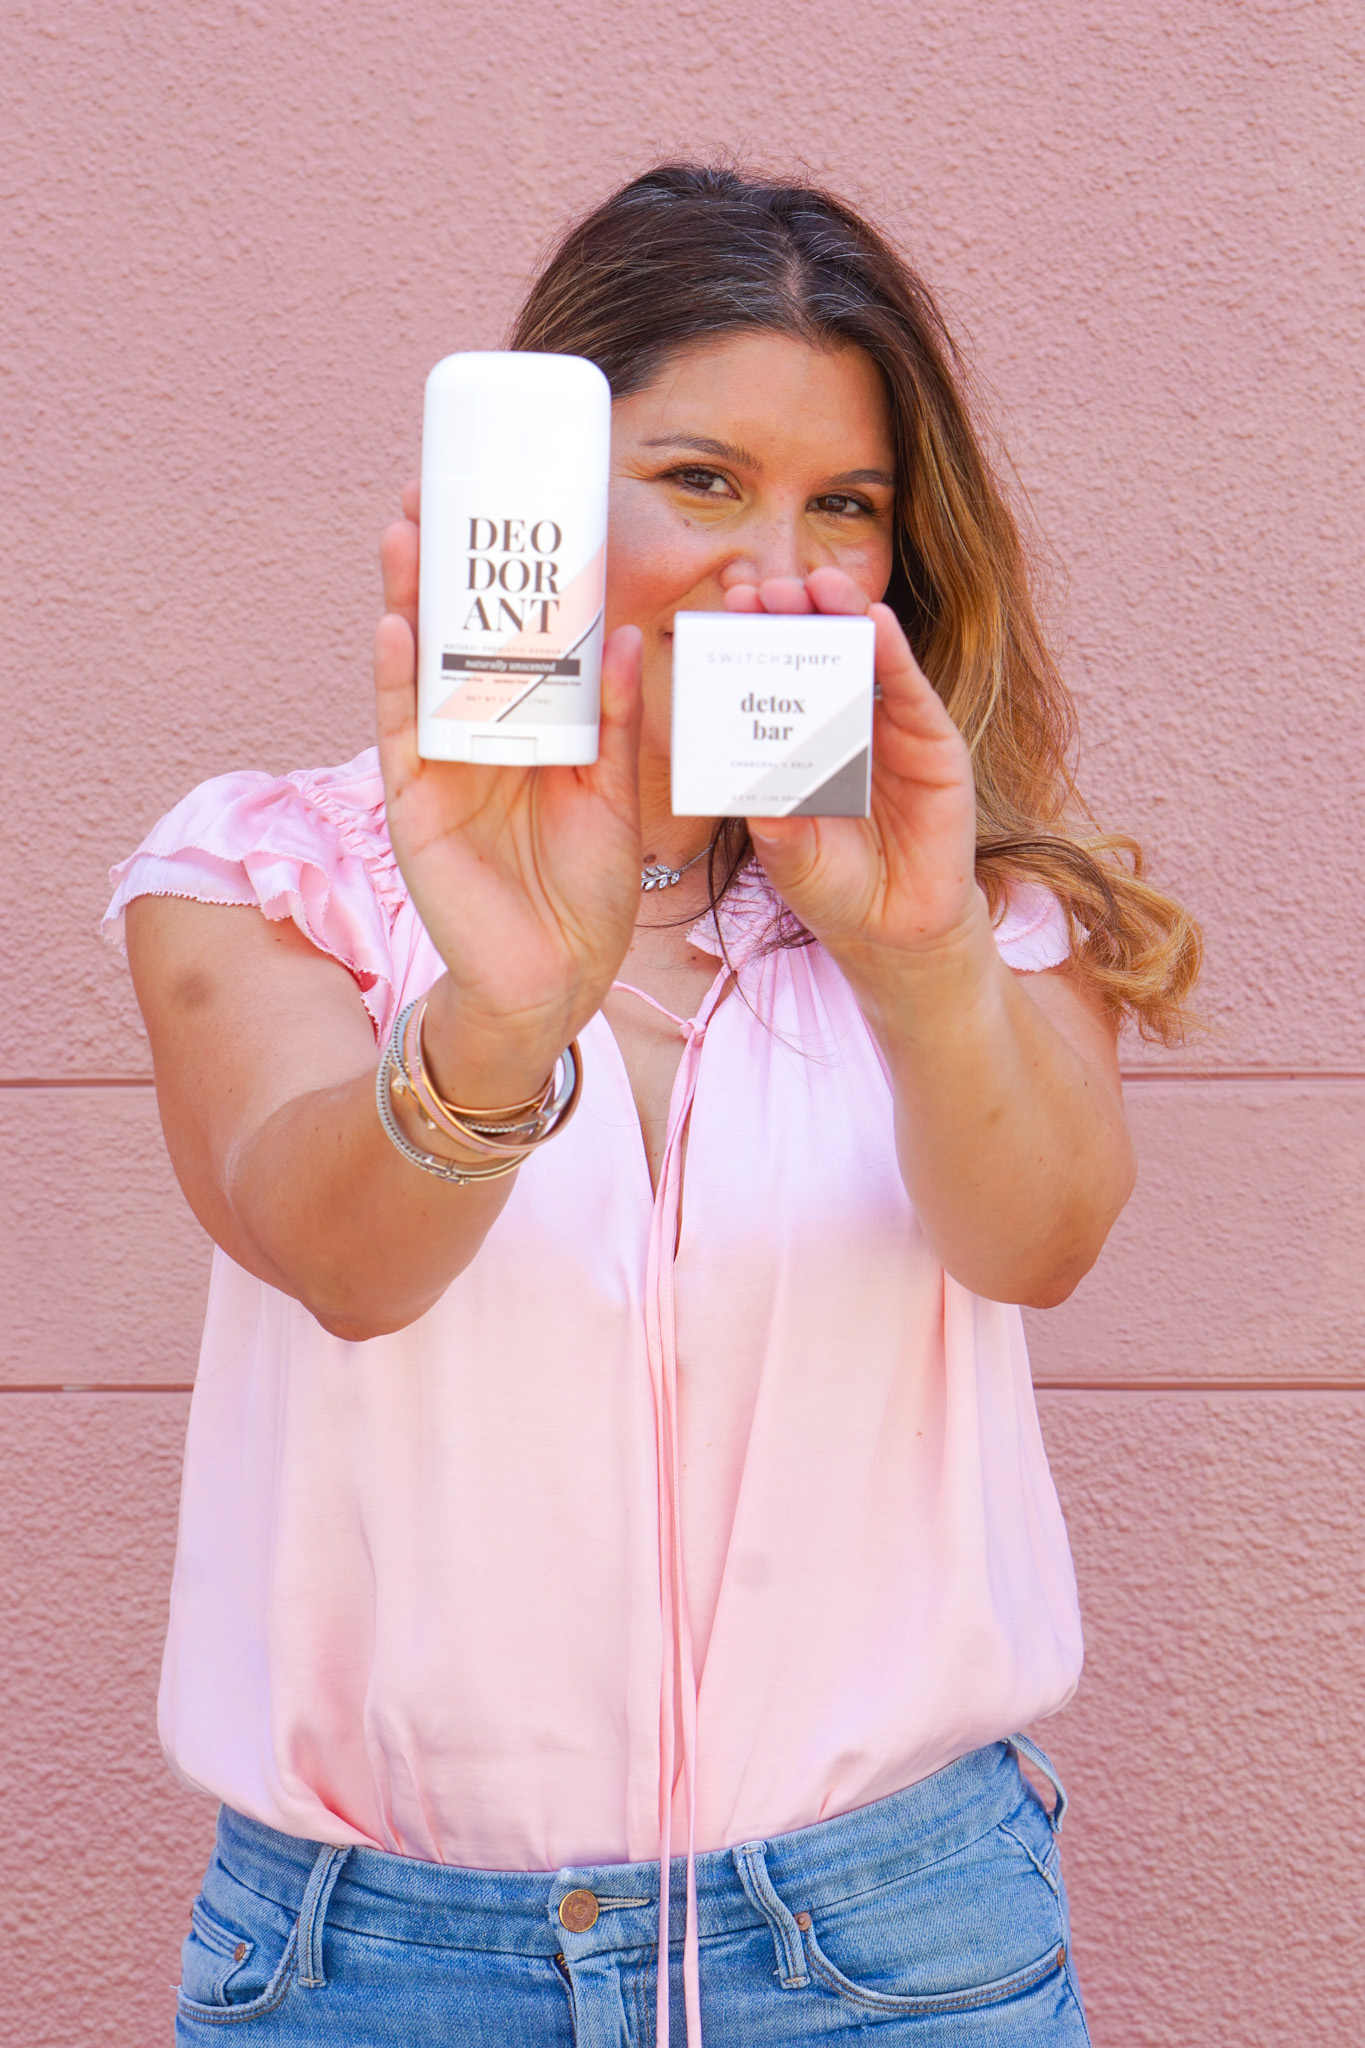 Non-Toxic Prebiotic Switch 2 Pure deodorant and Detox bar held by Founder Estela with a pink wall background